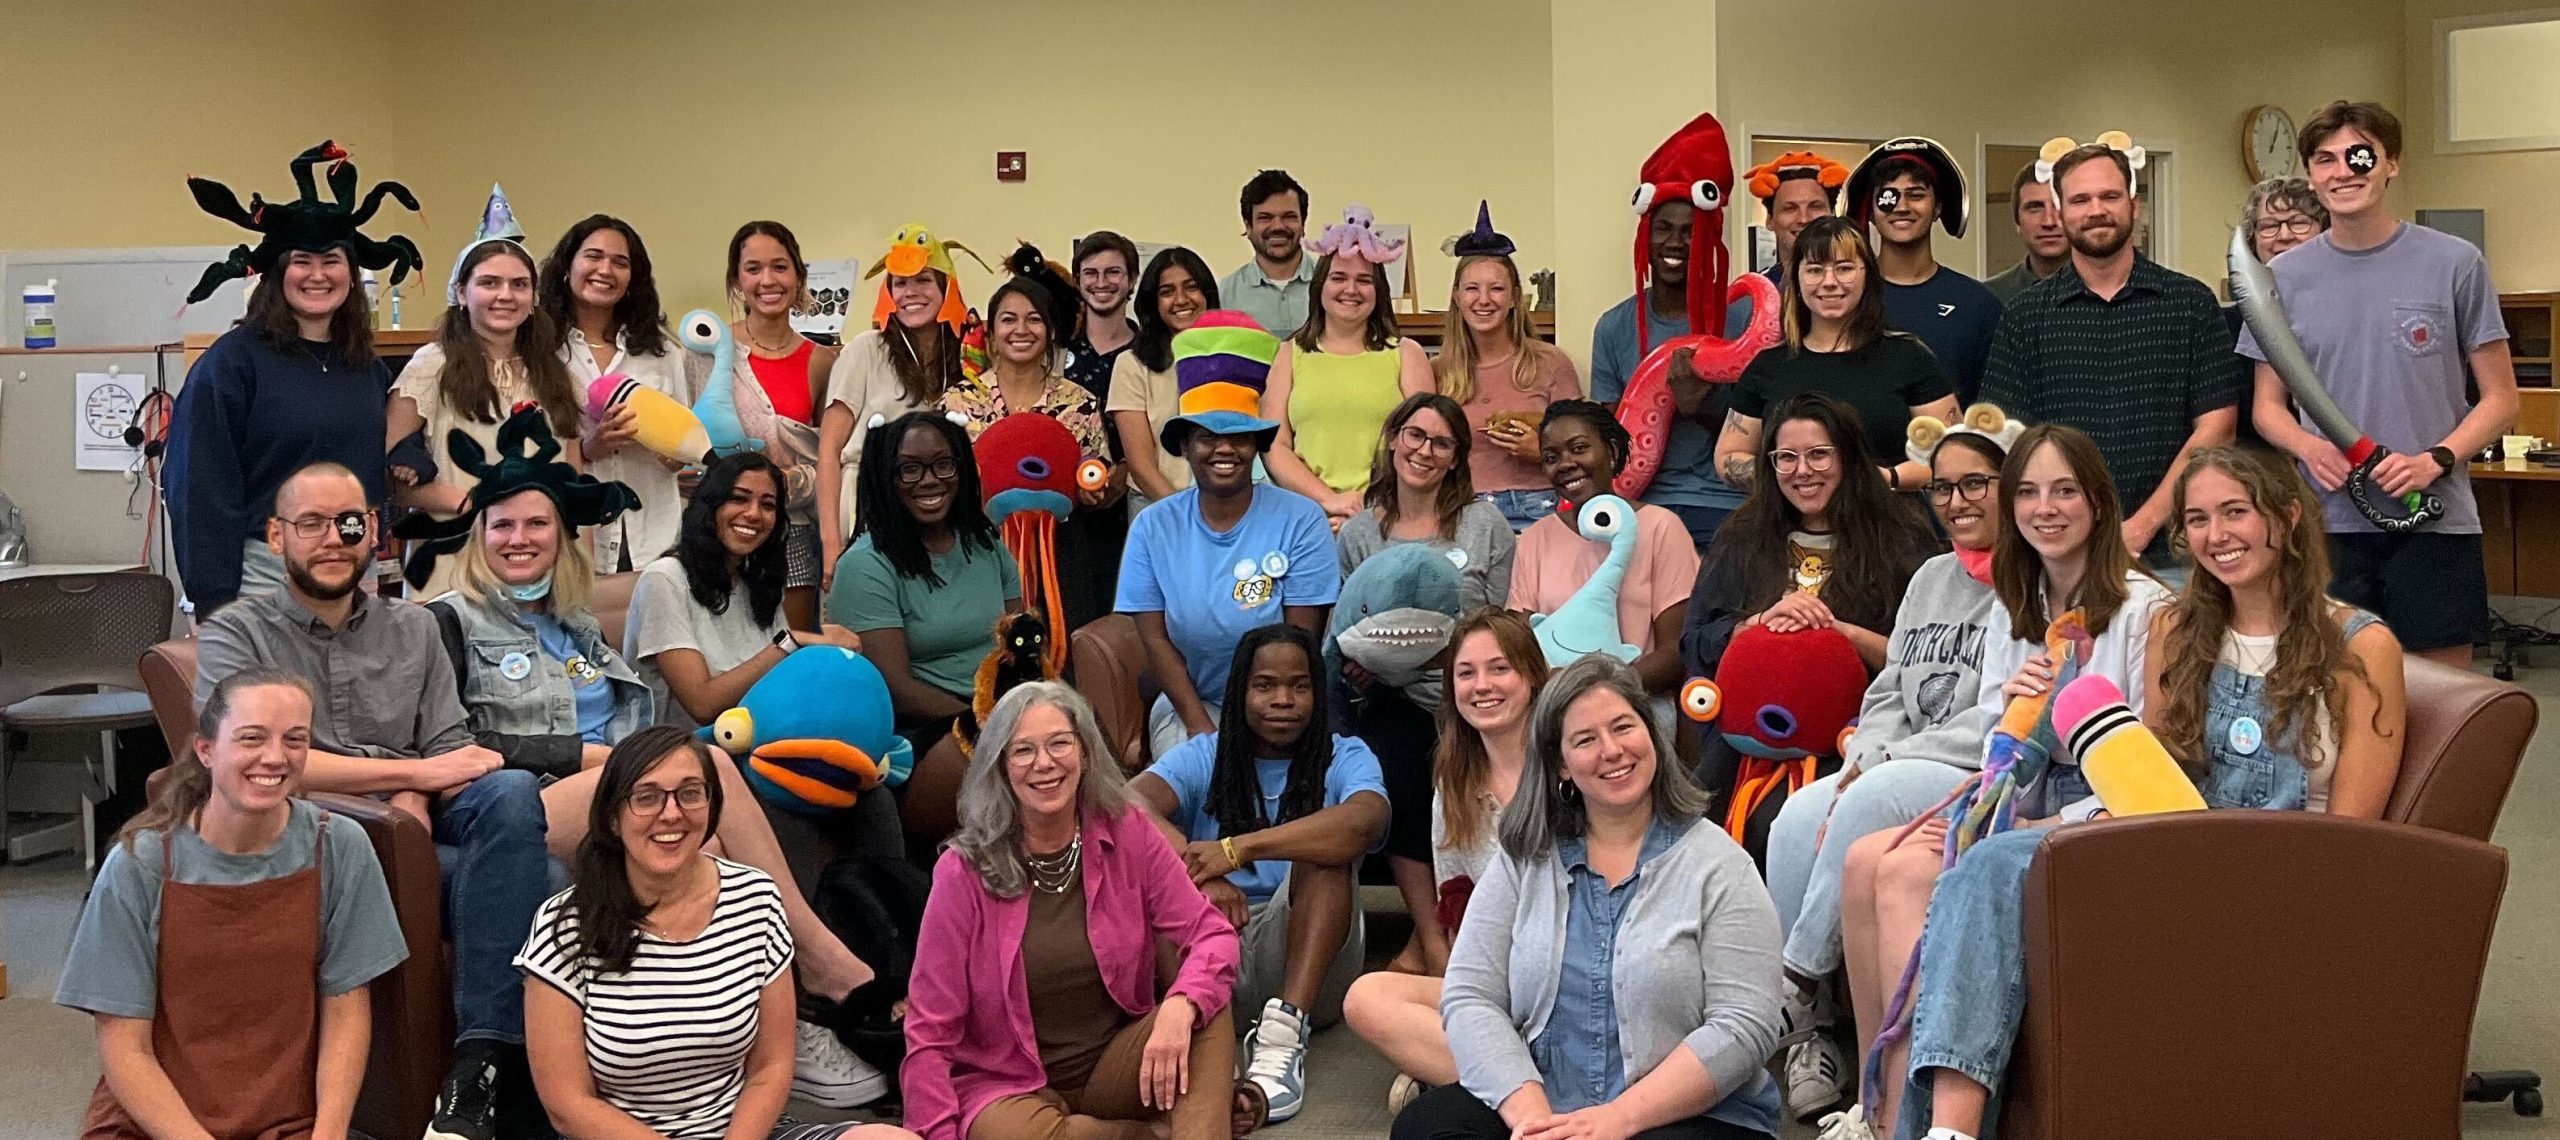 A photo of writing center staff posing together in a group photo. There are about 30 people clustered together over two couches, with some people standing behind the couches and a few people sitting on the floor. Many people are wearing silly hats or holding stuffed animal toys.